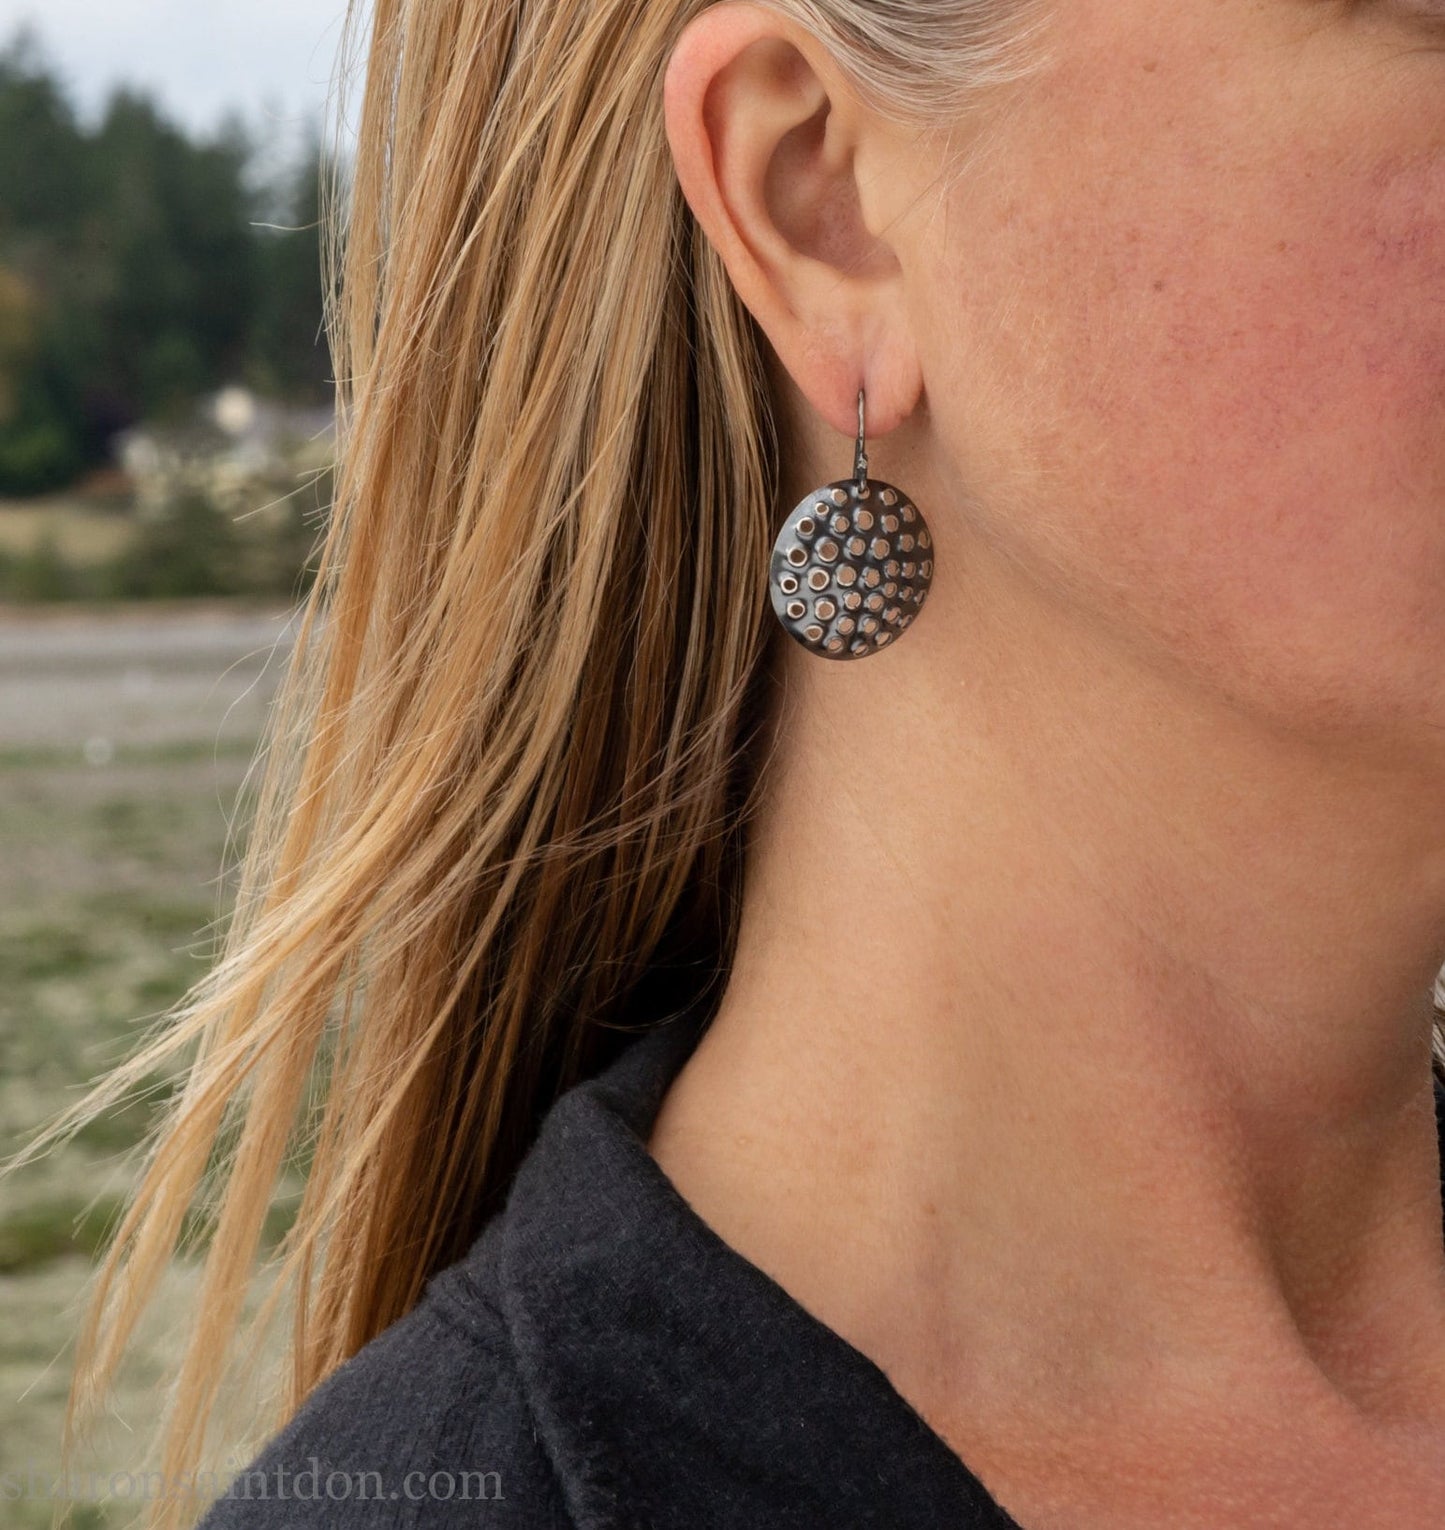 25mm round disc, antiqued 925 sterling silver earrings with mesh perforated holes